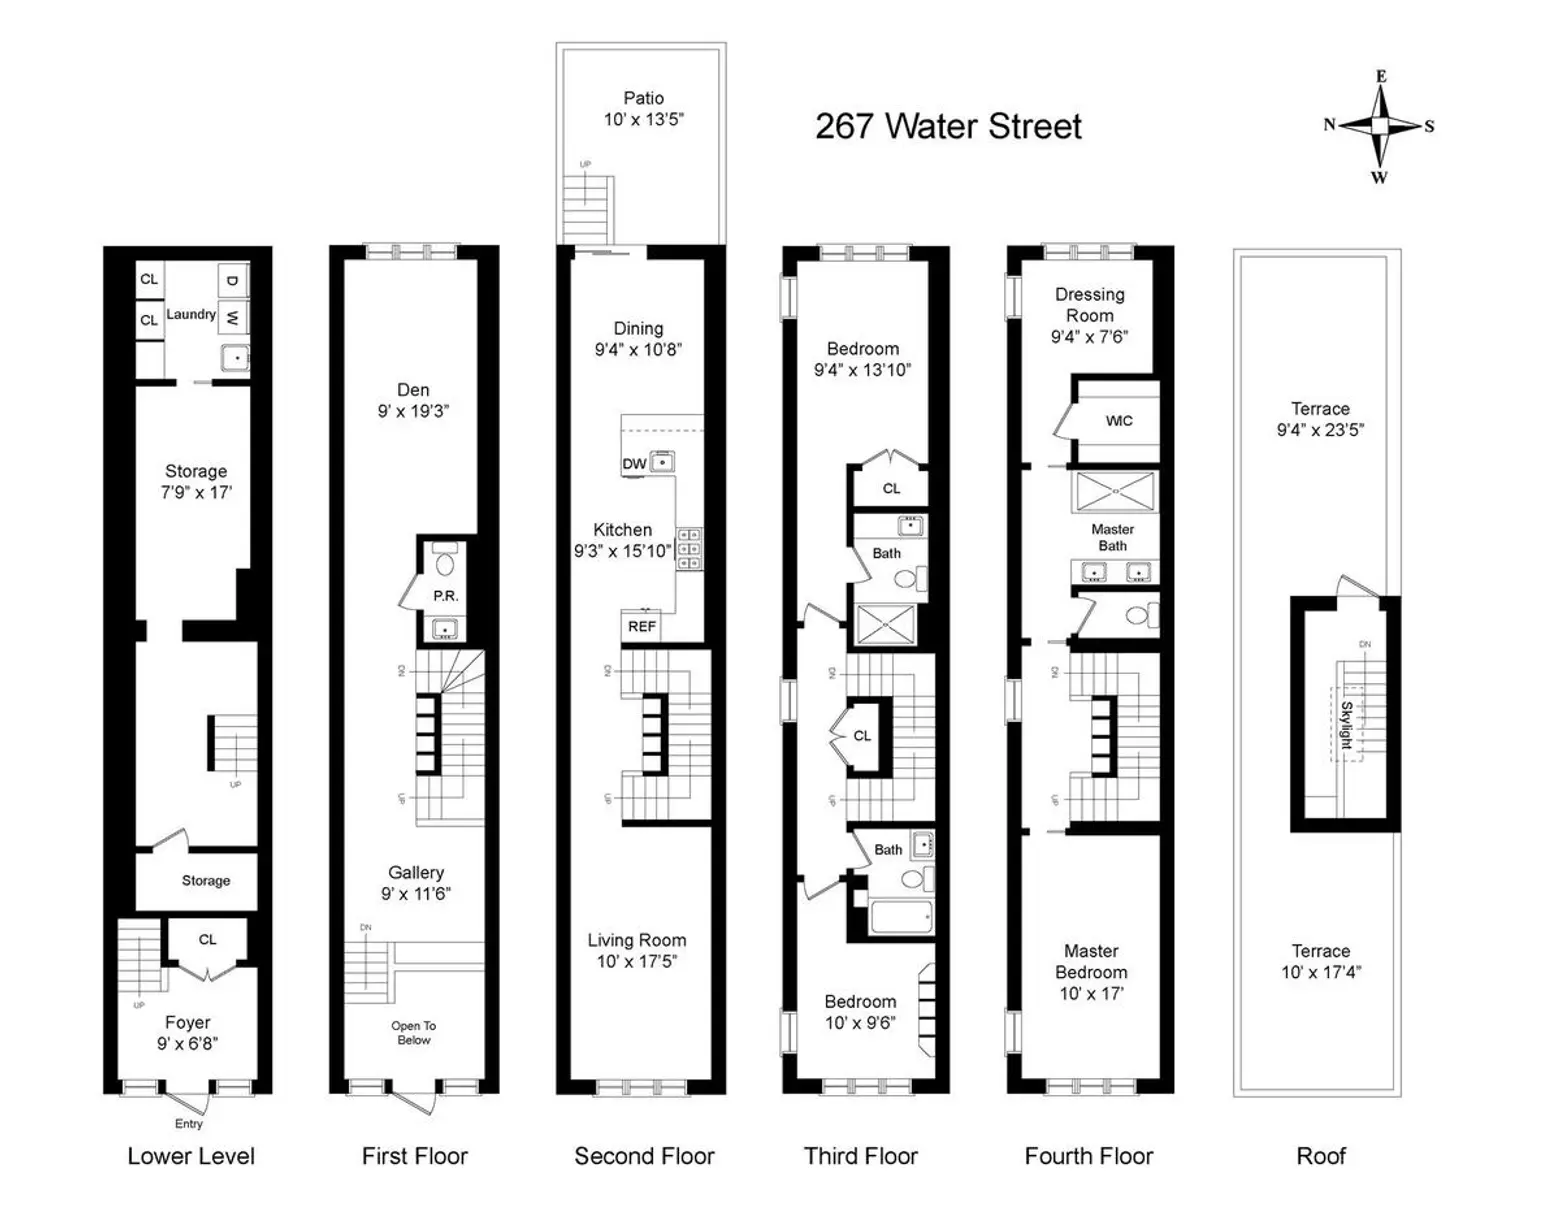 246 Front Street, 267 Water Street, Seaport District townhouse, NYC narrow house, 12-foot-wide house